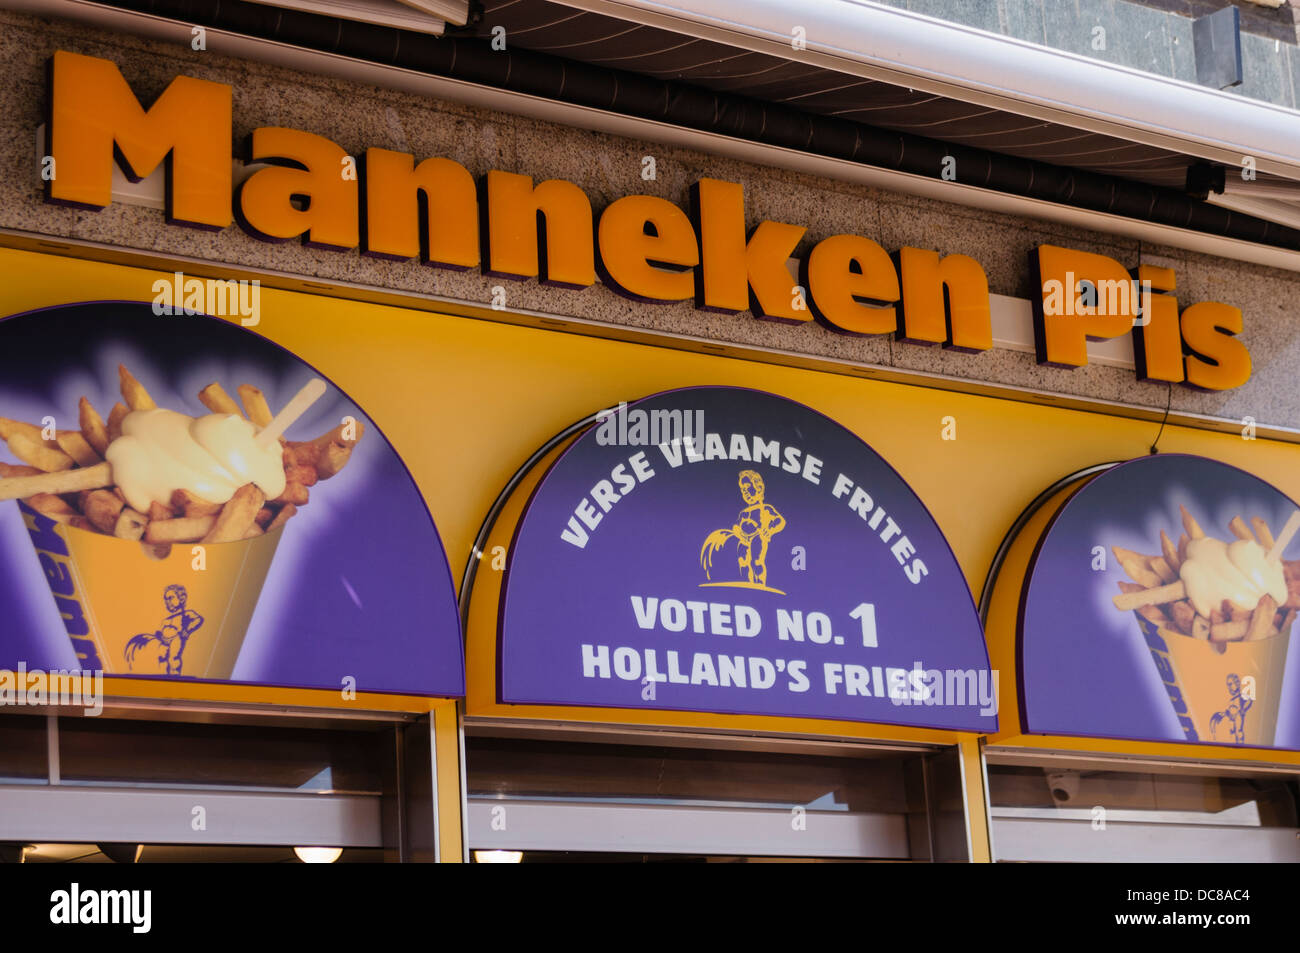 'Manneken Pis' fries outlet in Amsterdam Stock Photo